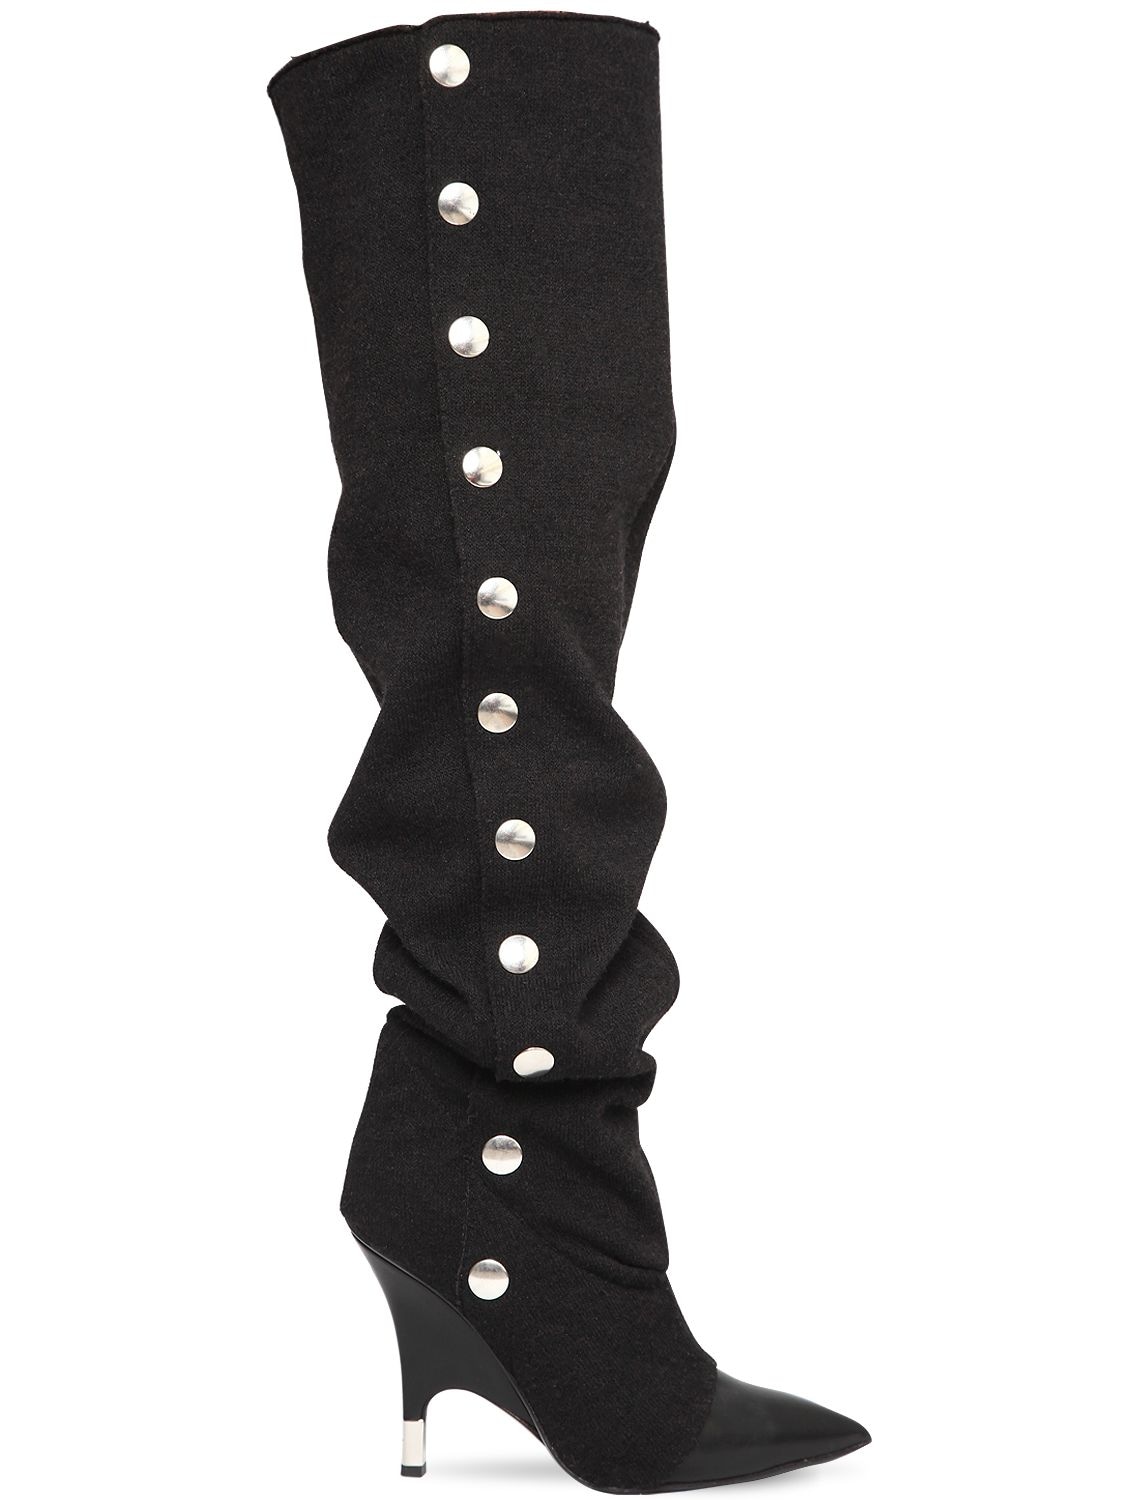 GIUSEPPE ZANOTTI 110MM SLOUCHY JERSEY OVER THE KNEE BOOTS,68IA92002-NzkyMTg1